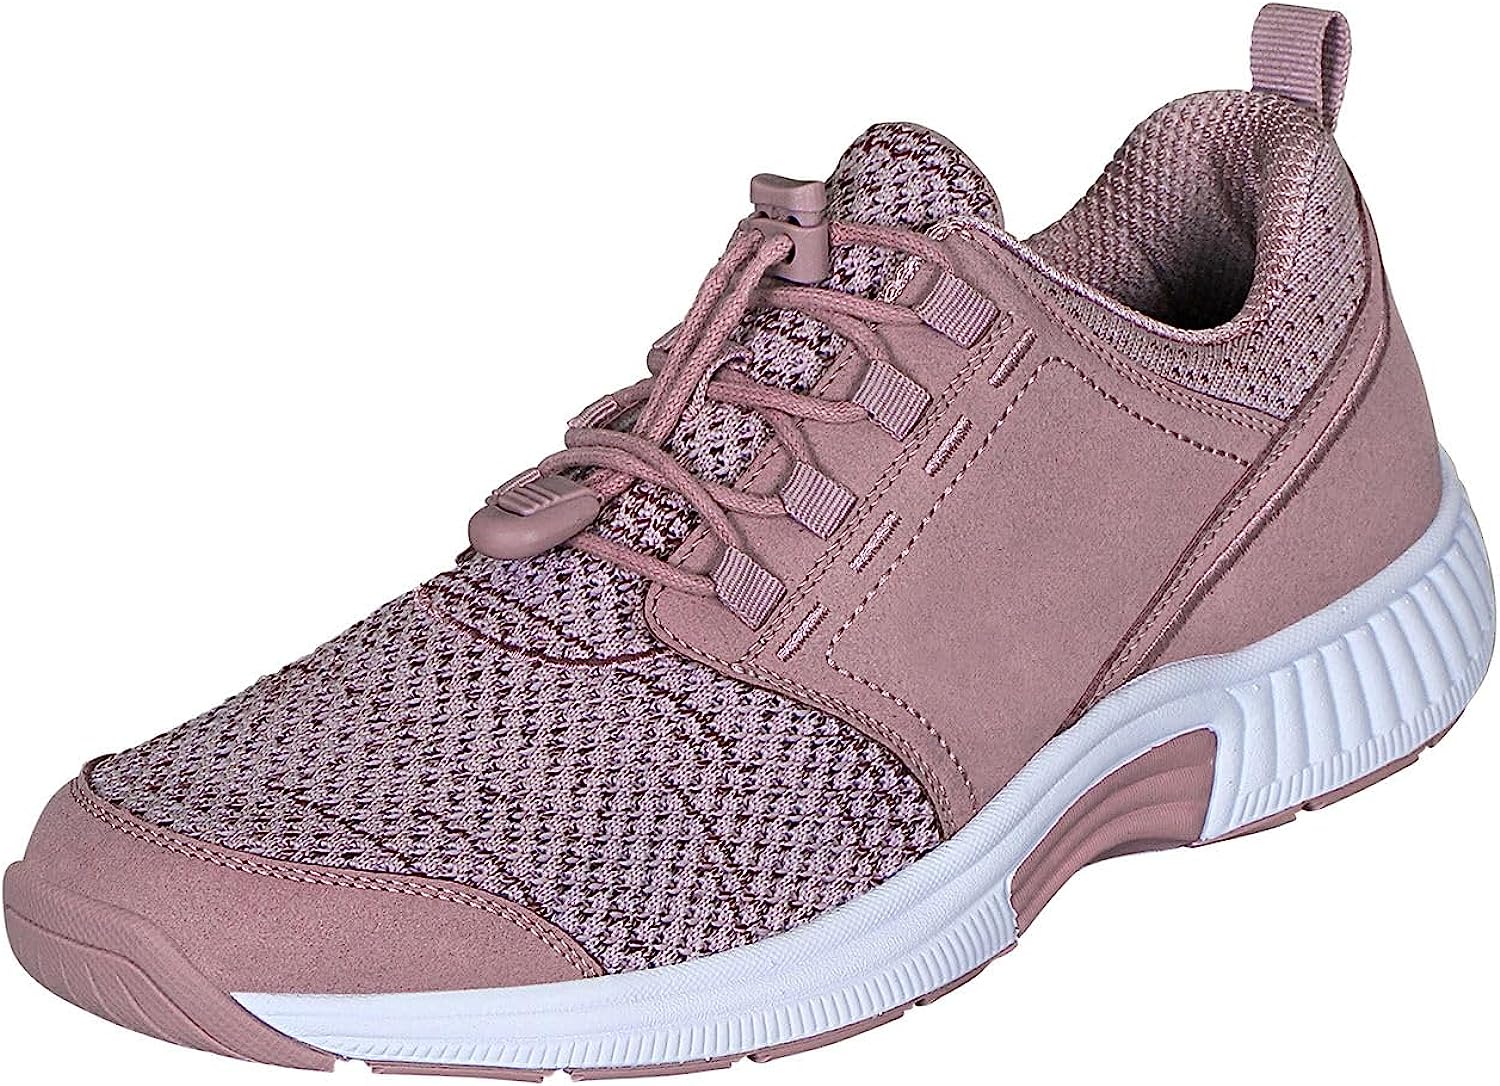 Orthofeet Women's Orthopedic No-Tie Sneaker with Arch [...]